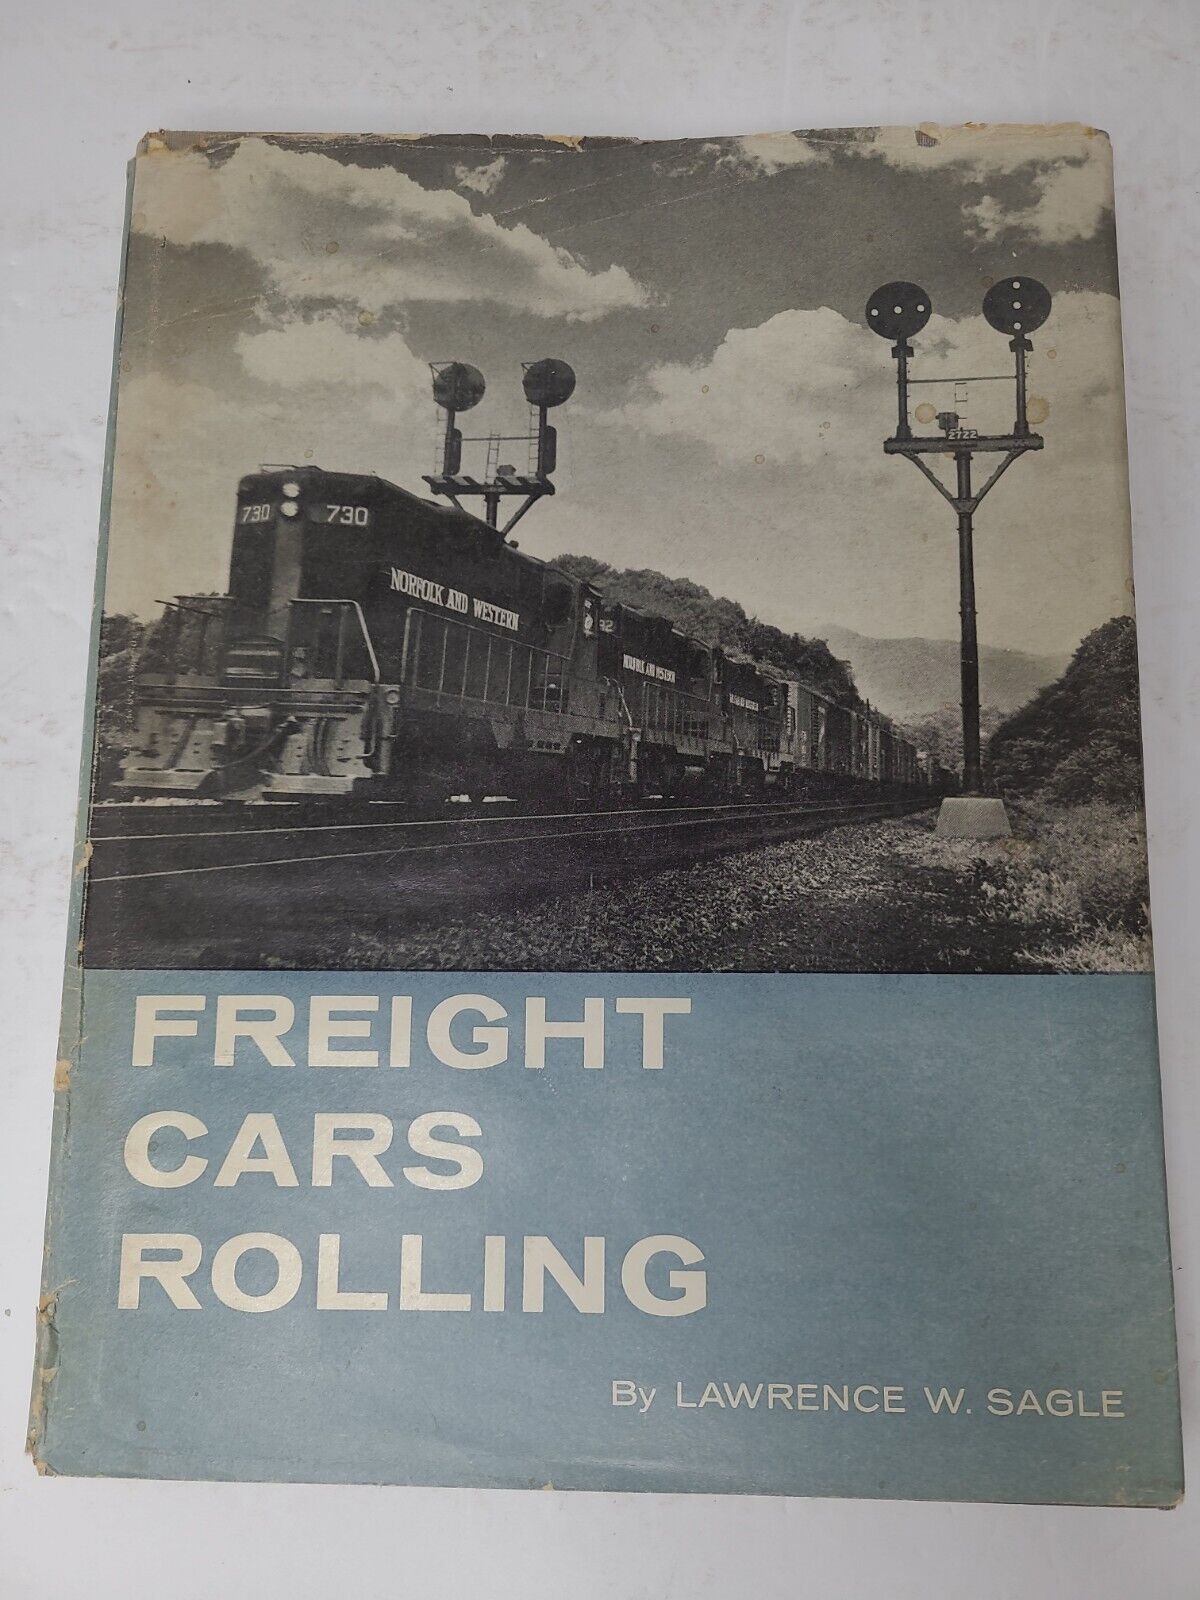 Freight Cars Rolling by Lawrence Sagle Dust jacket 1960 Simmons Boardman